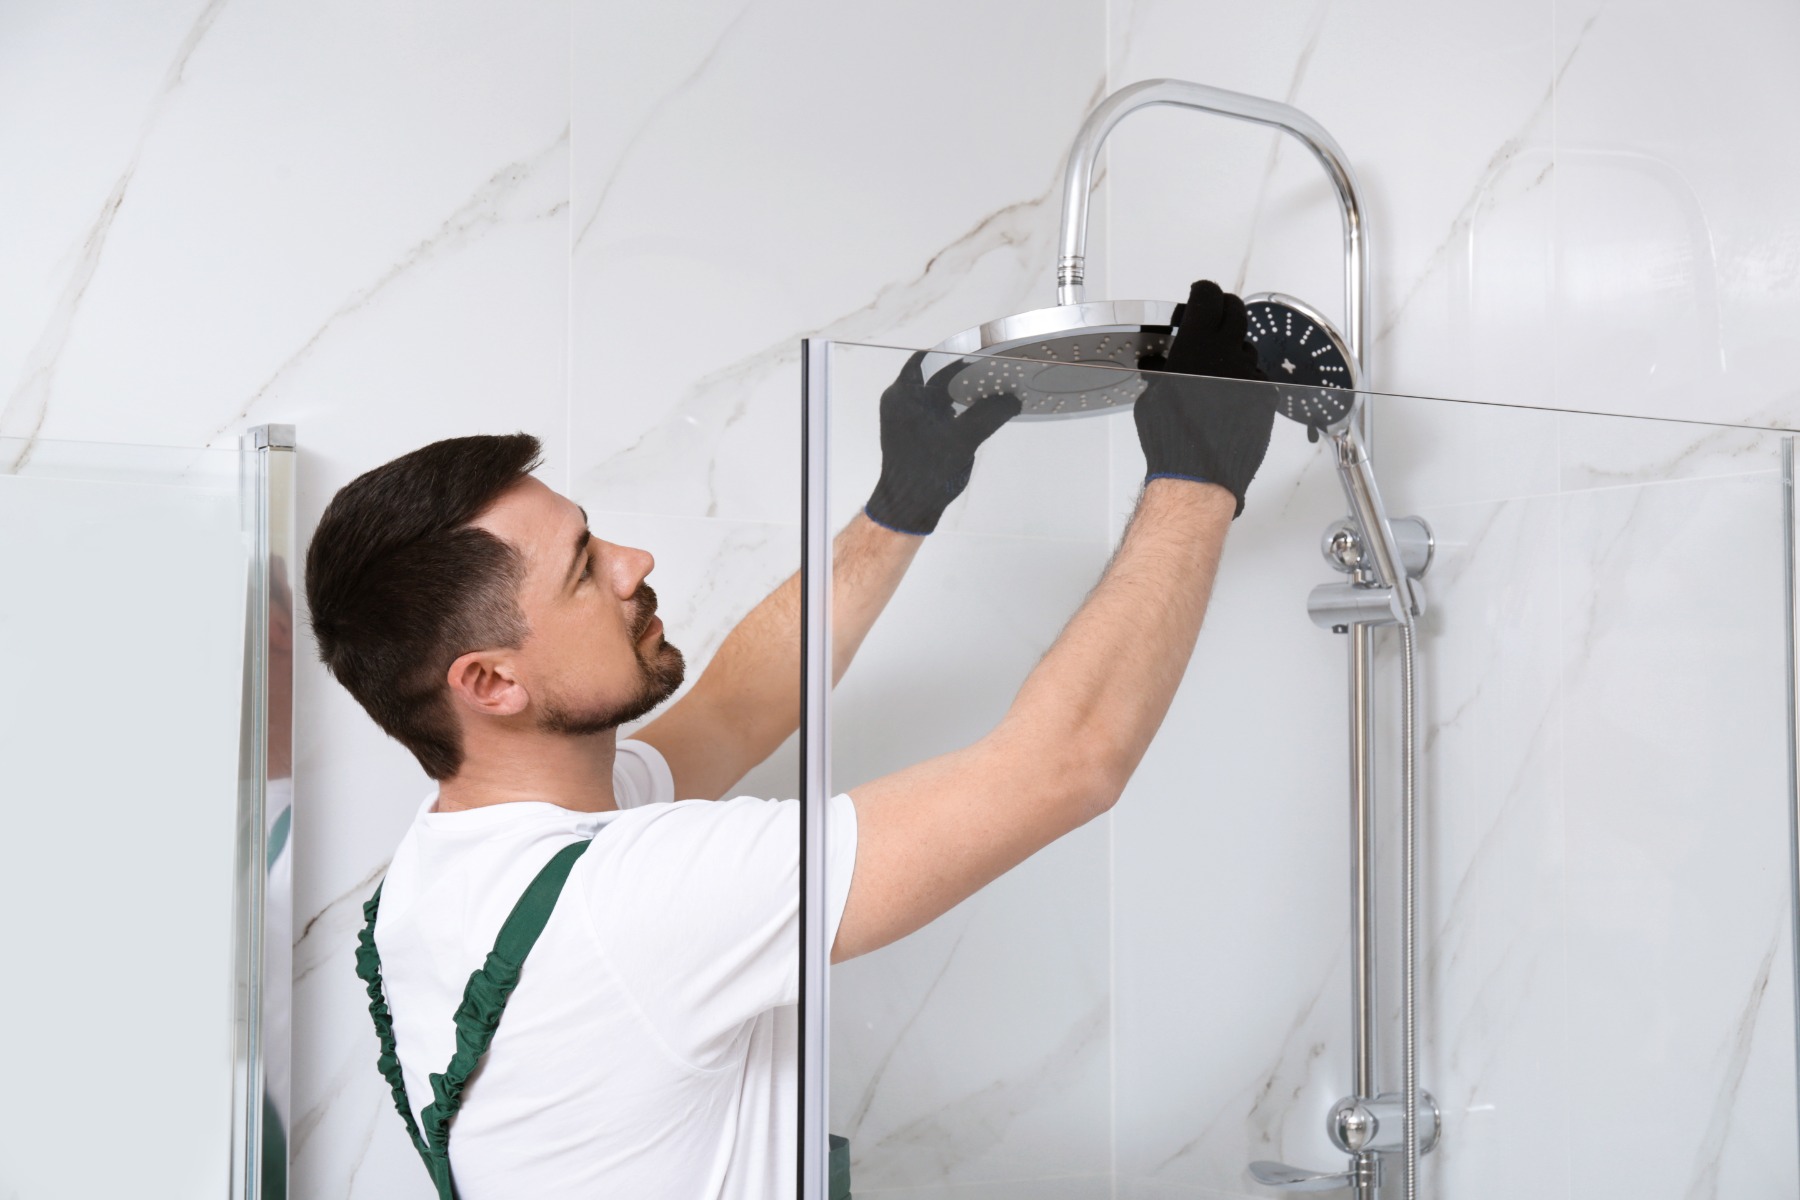 Plumber Fitting Showerhead Into Newly Built Enclosure